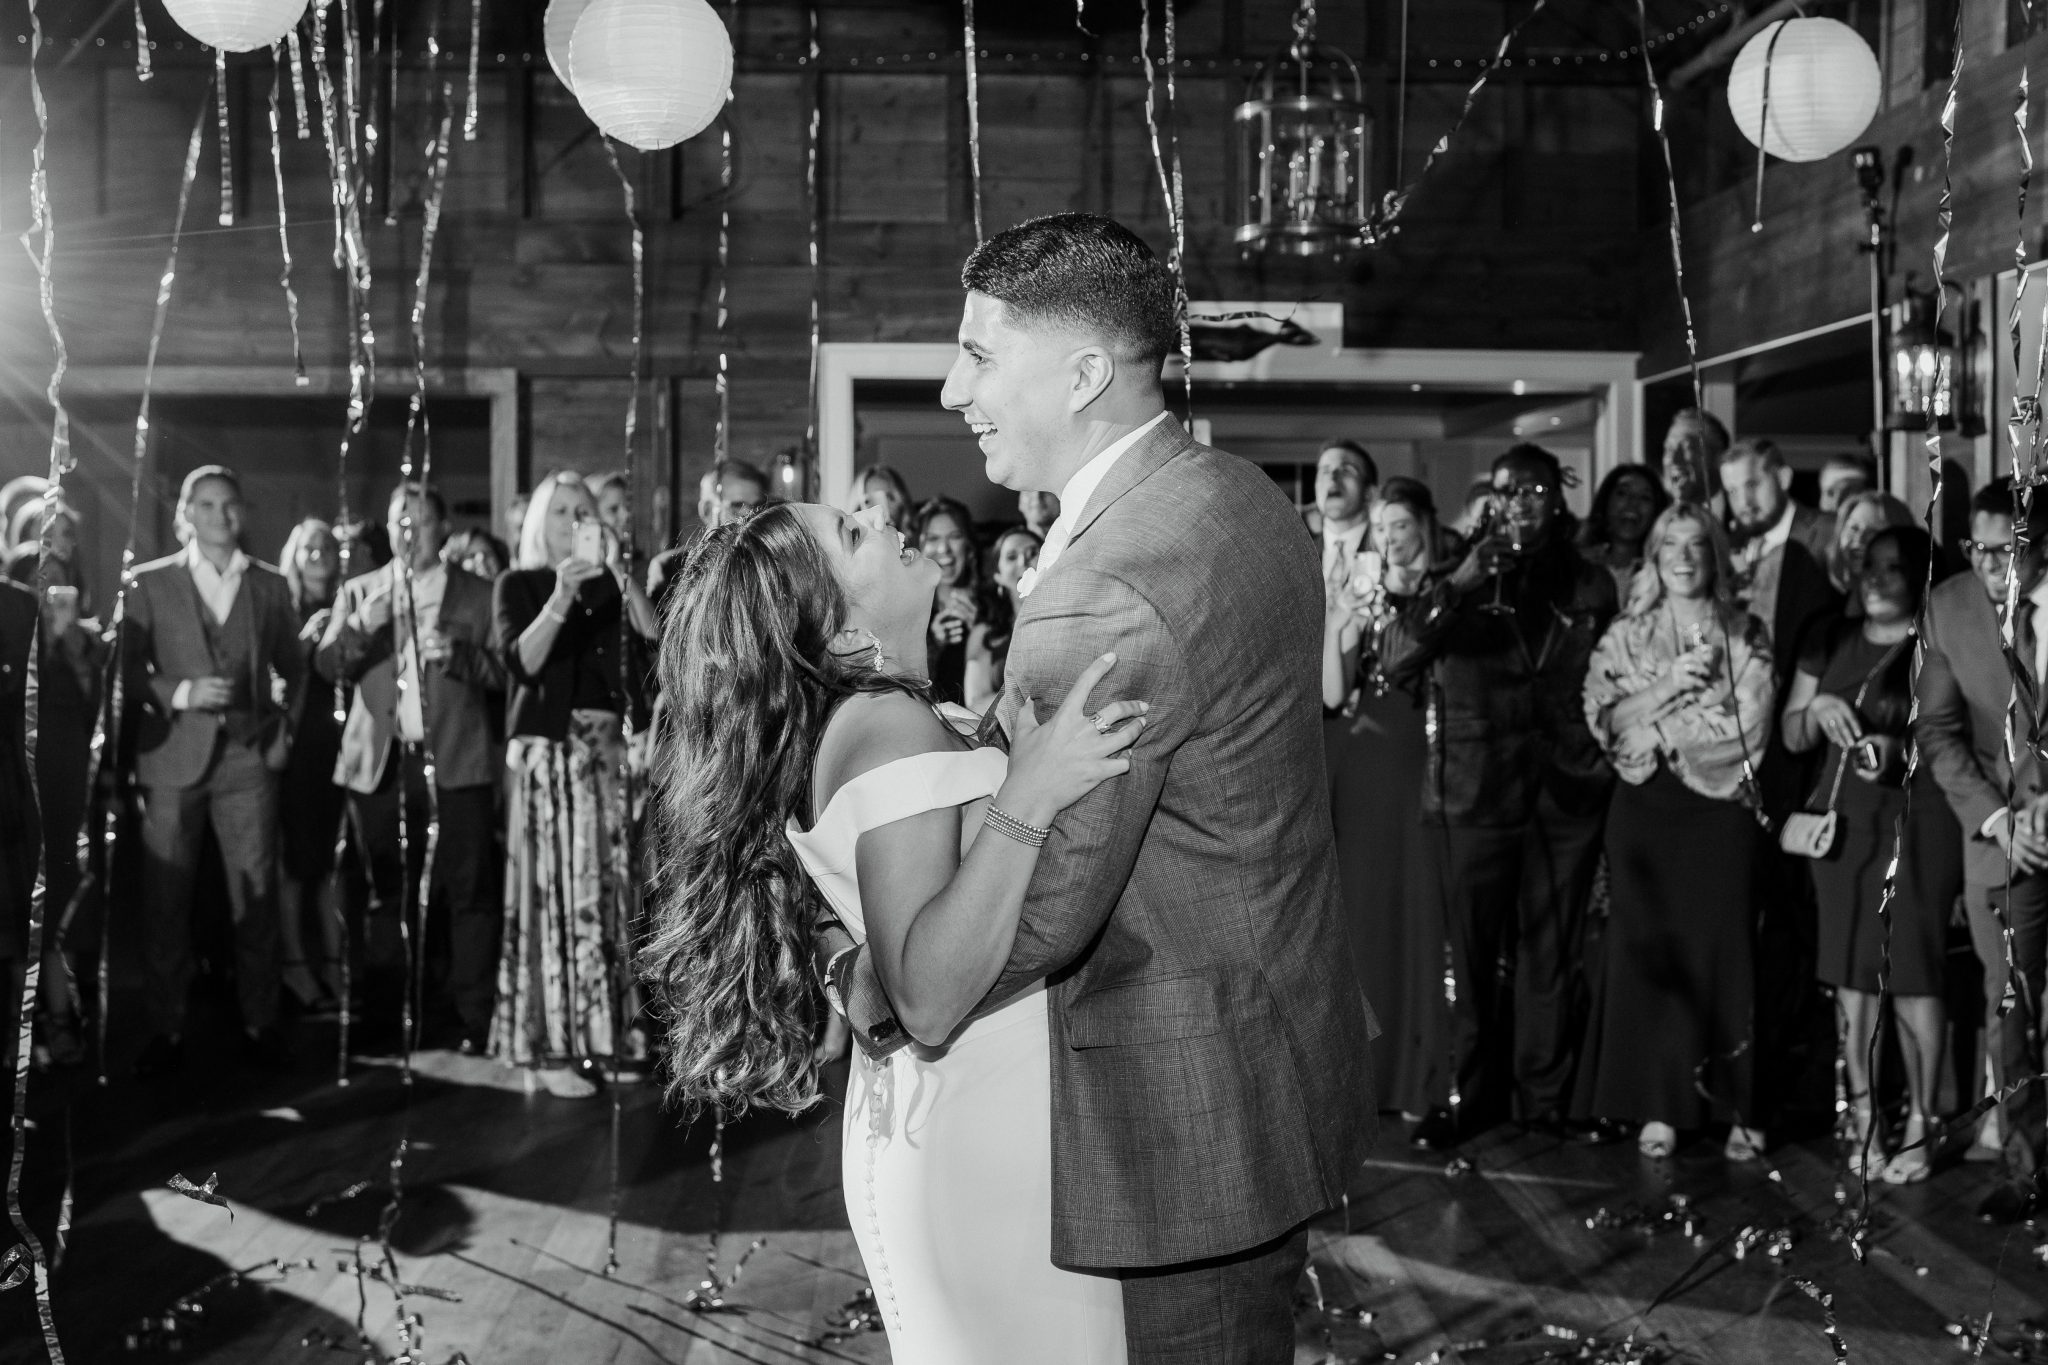 Wedding Photography Tips: How to Take Gorgeous Indoor Wedding Photos by popular New England photographer, Shannon Shipman: image of a bride and groom dancing together. 